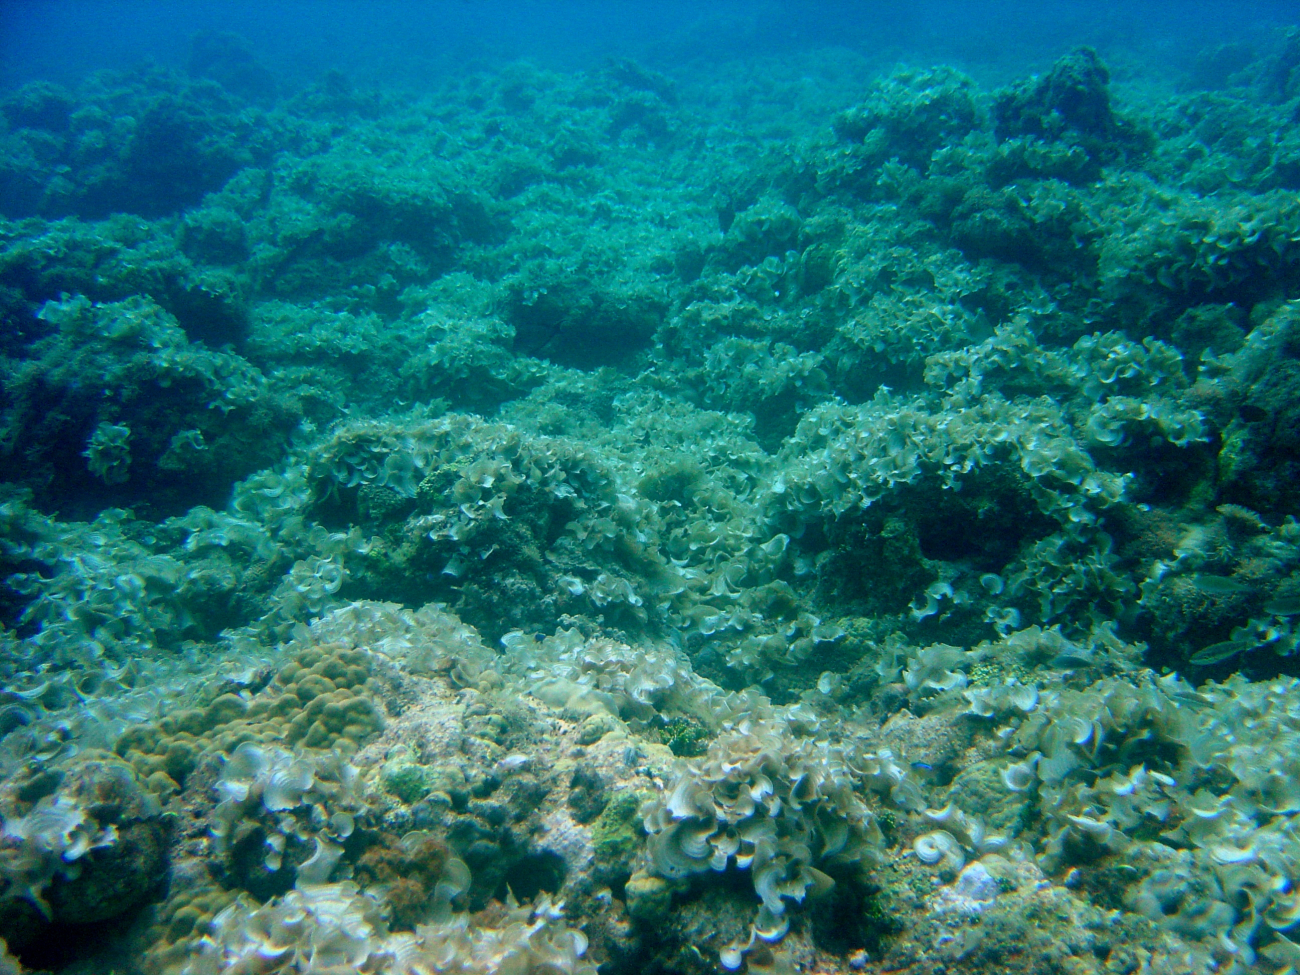 A desolated area of reef